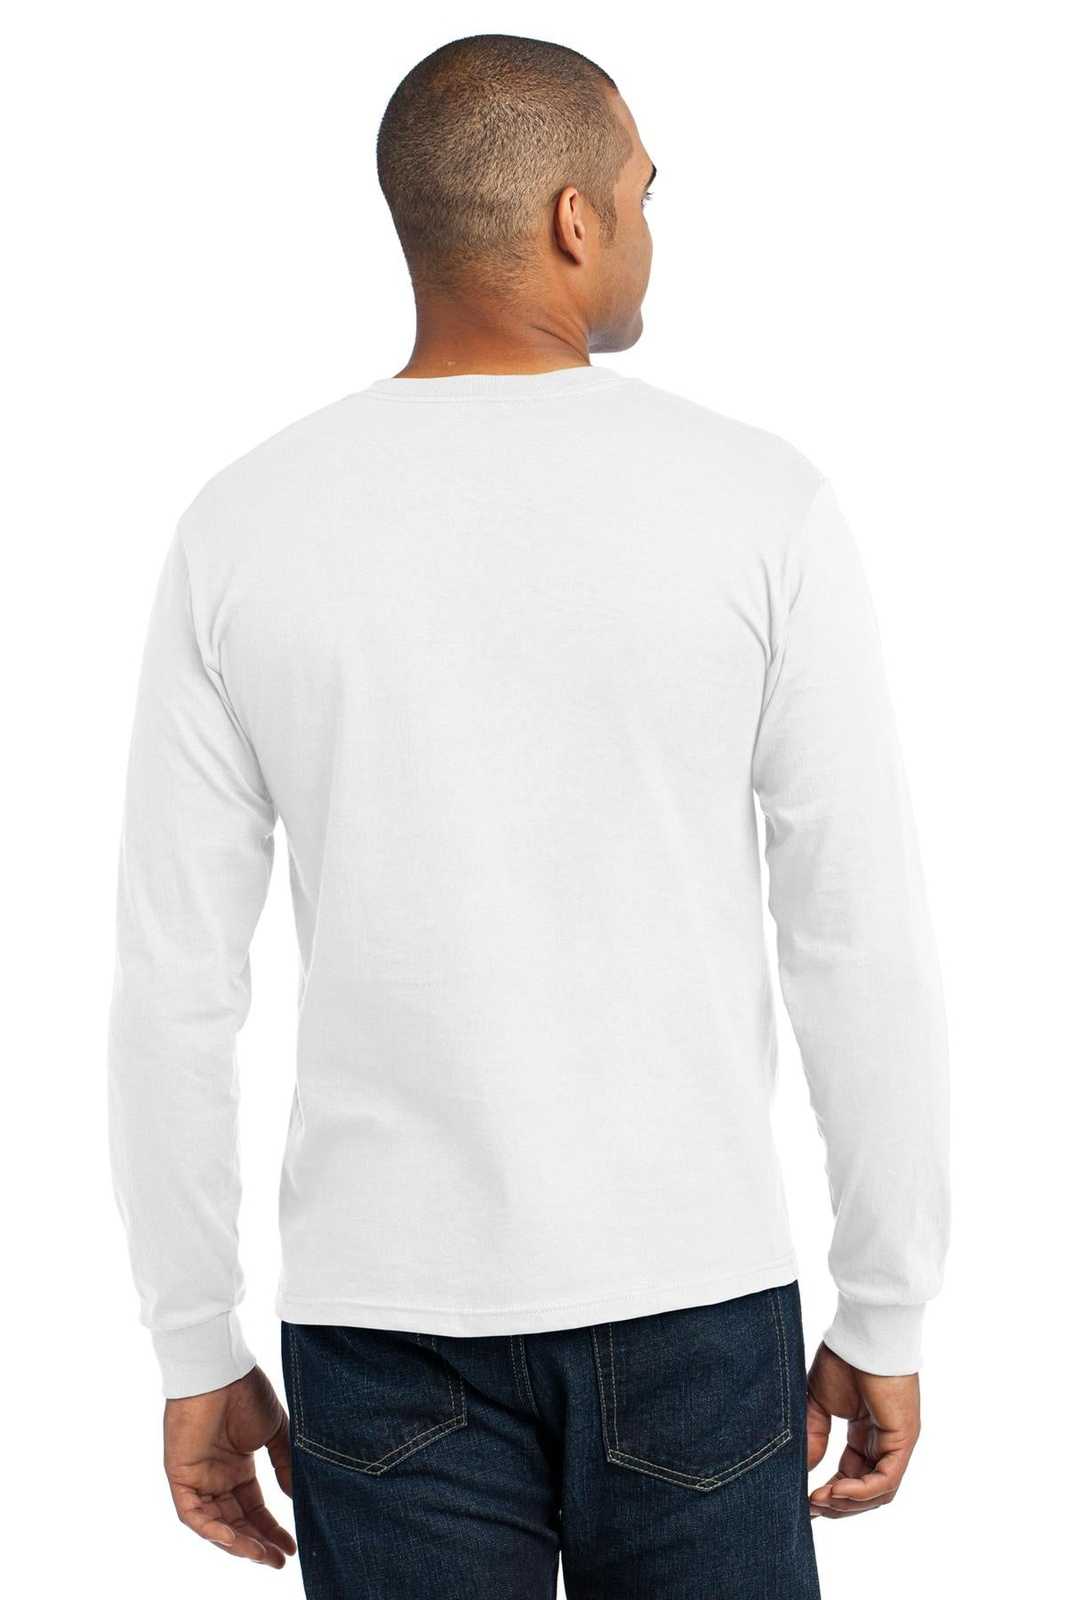 Port &amp; Company USA100LS Long Sleeve All-American Tee - White - HIT a Double - 2